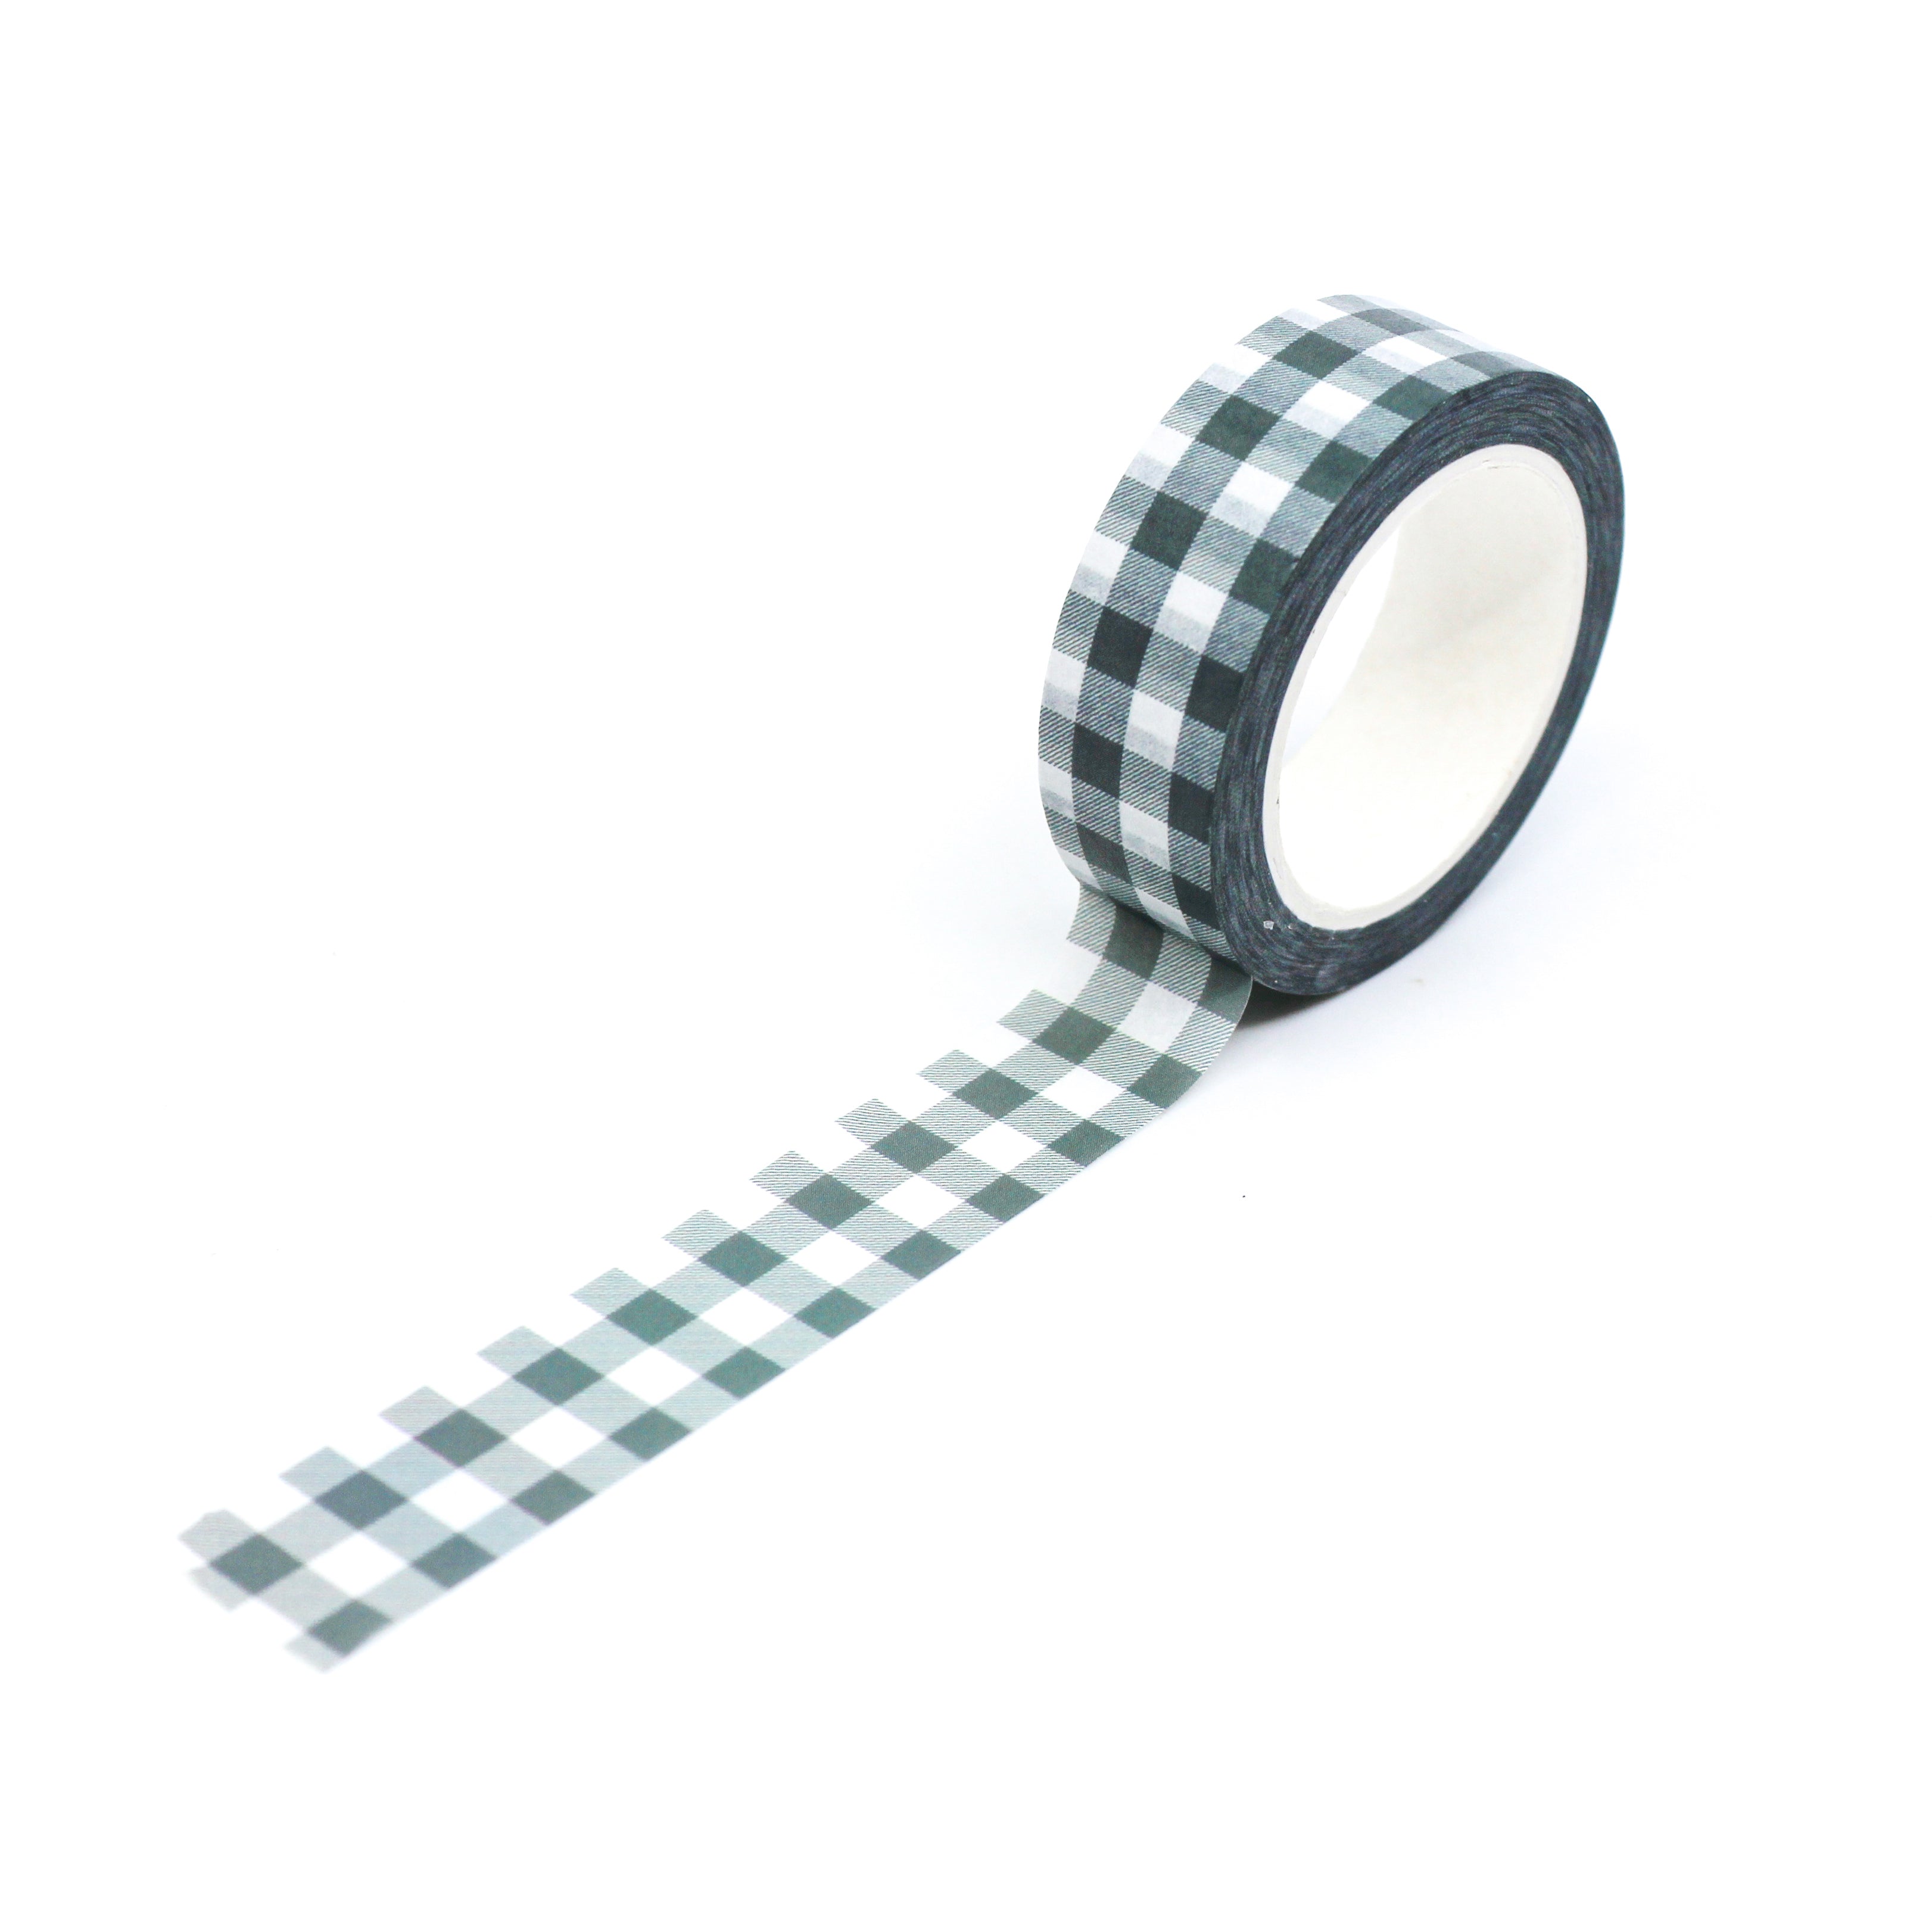 This is a full pattern repeat view of green plaid craft Christmas Holiday washi tape from BBB Supplies Craft Shop